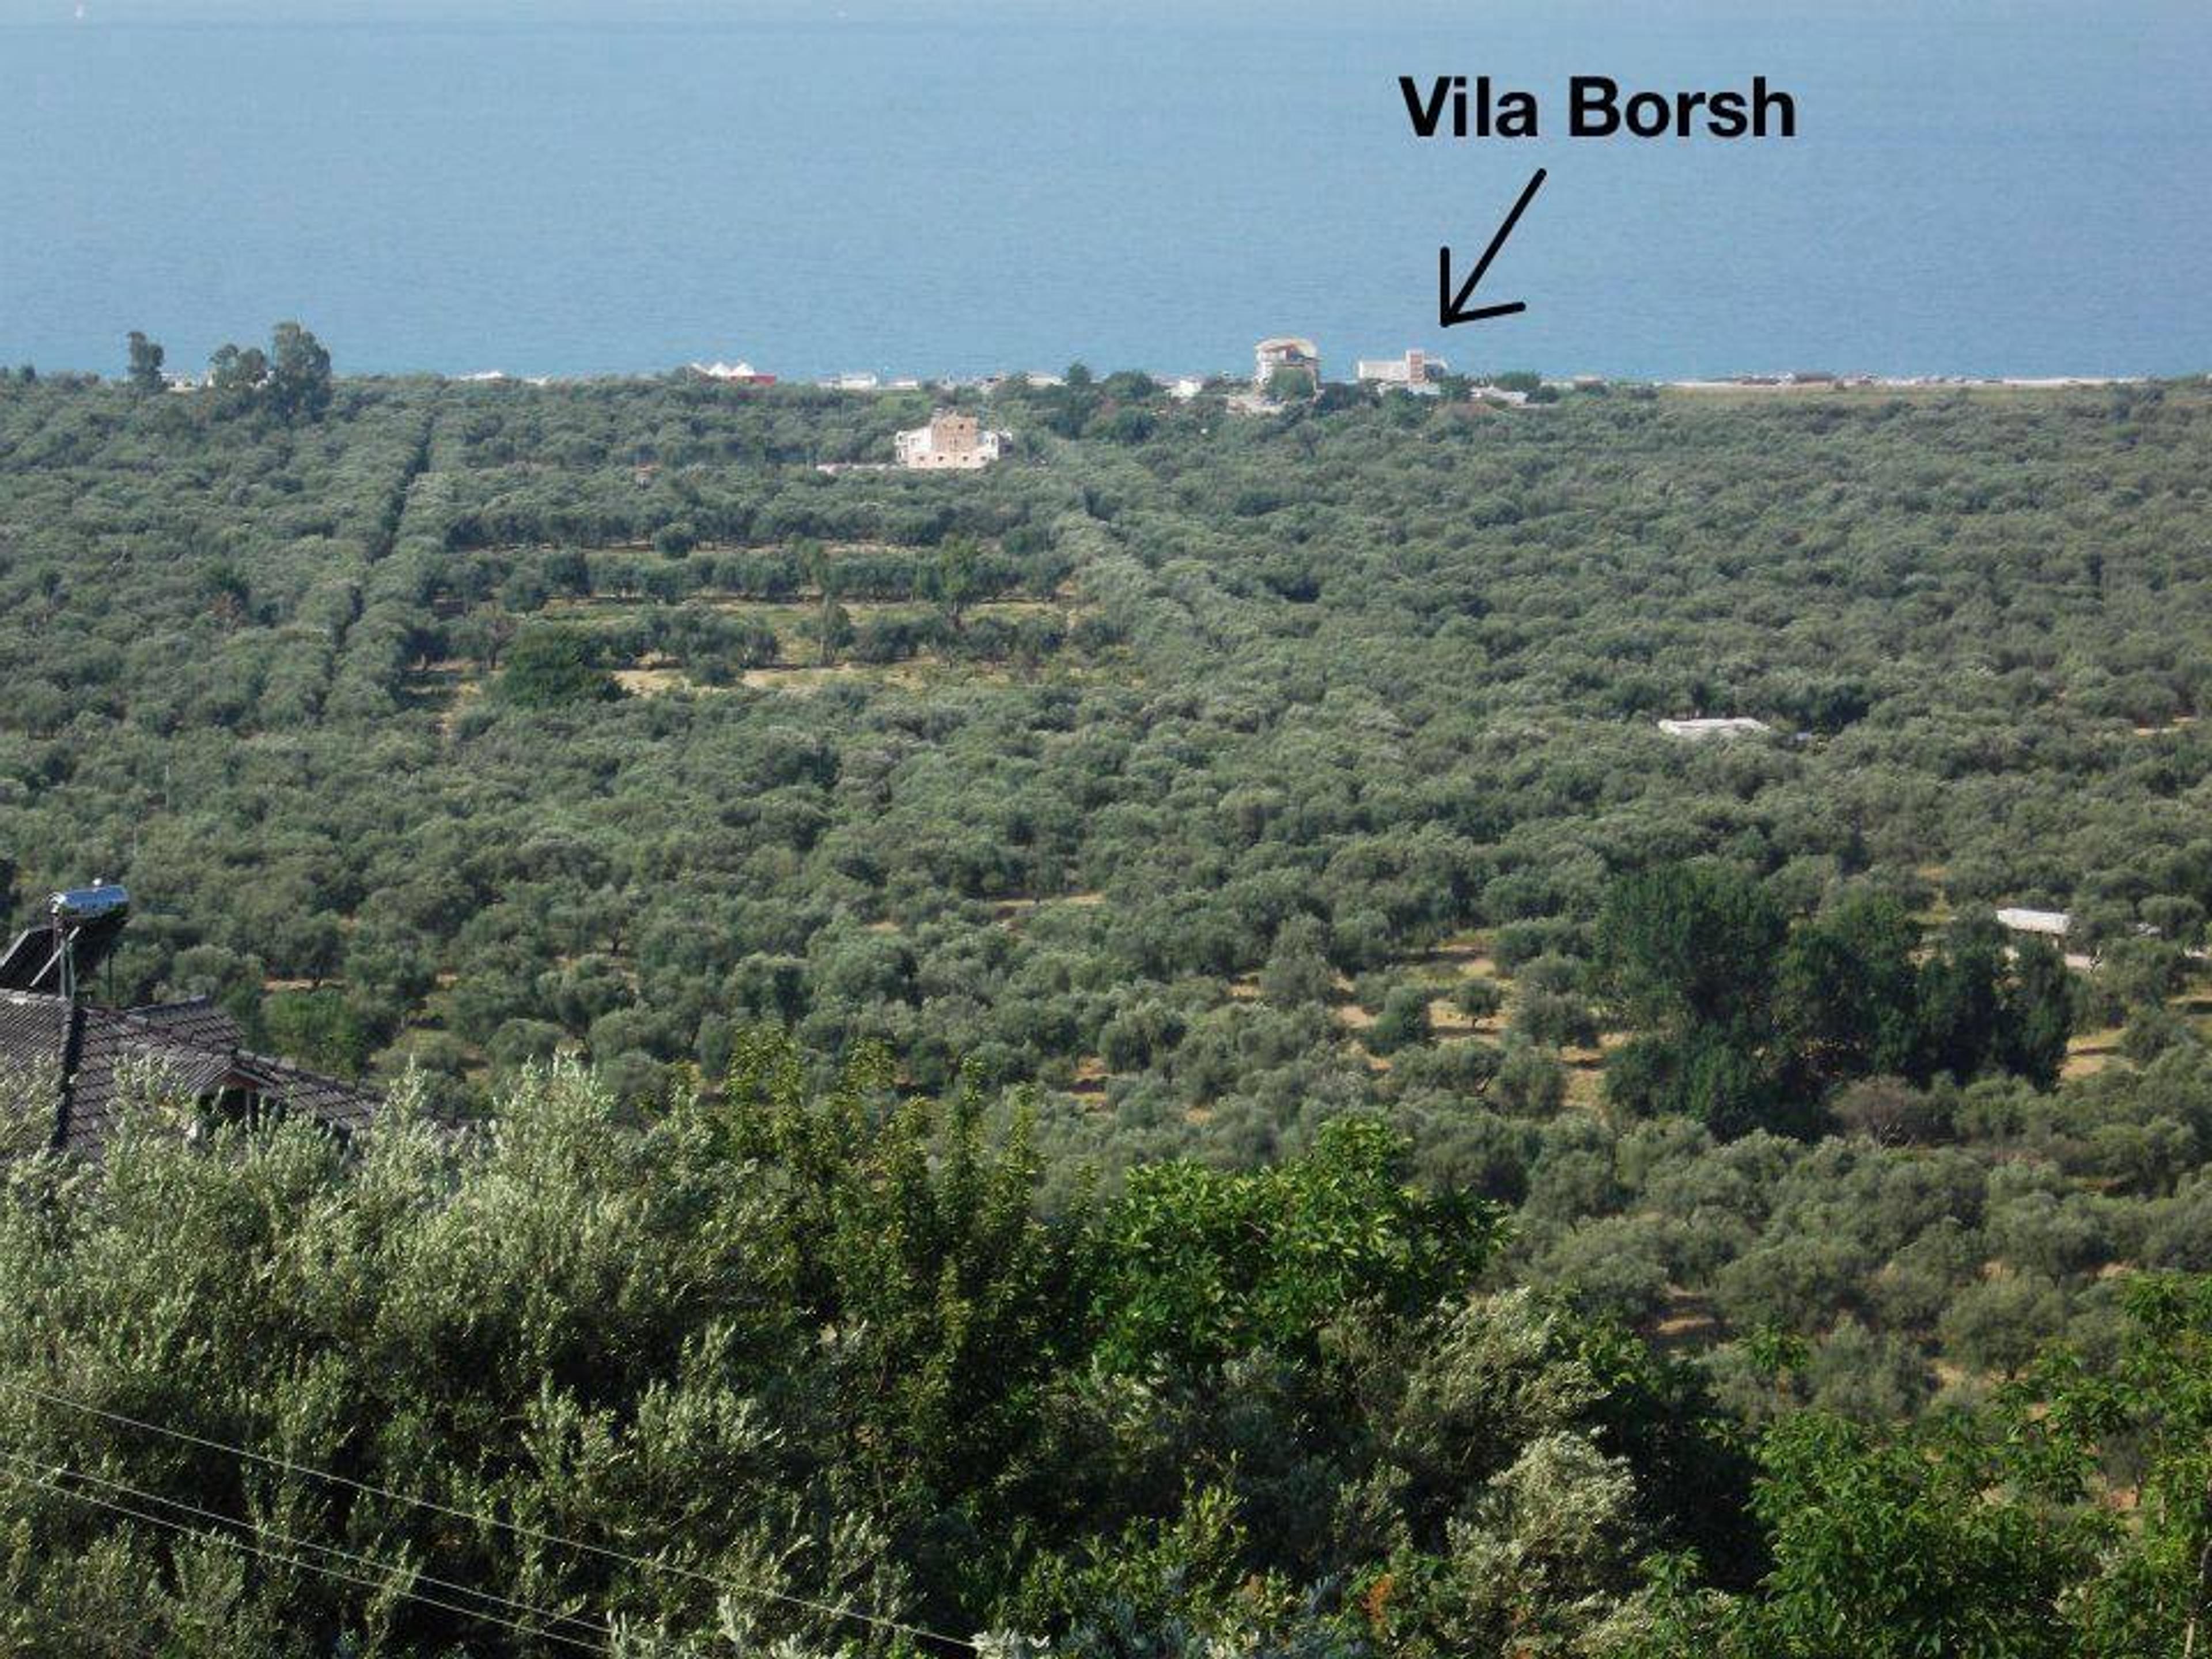 View of the olive gardens of Borsh